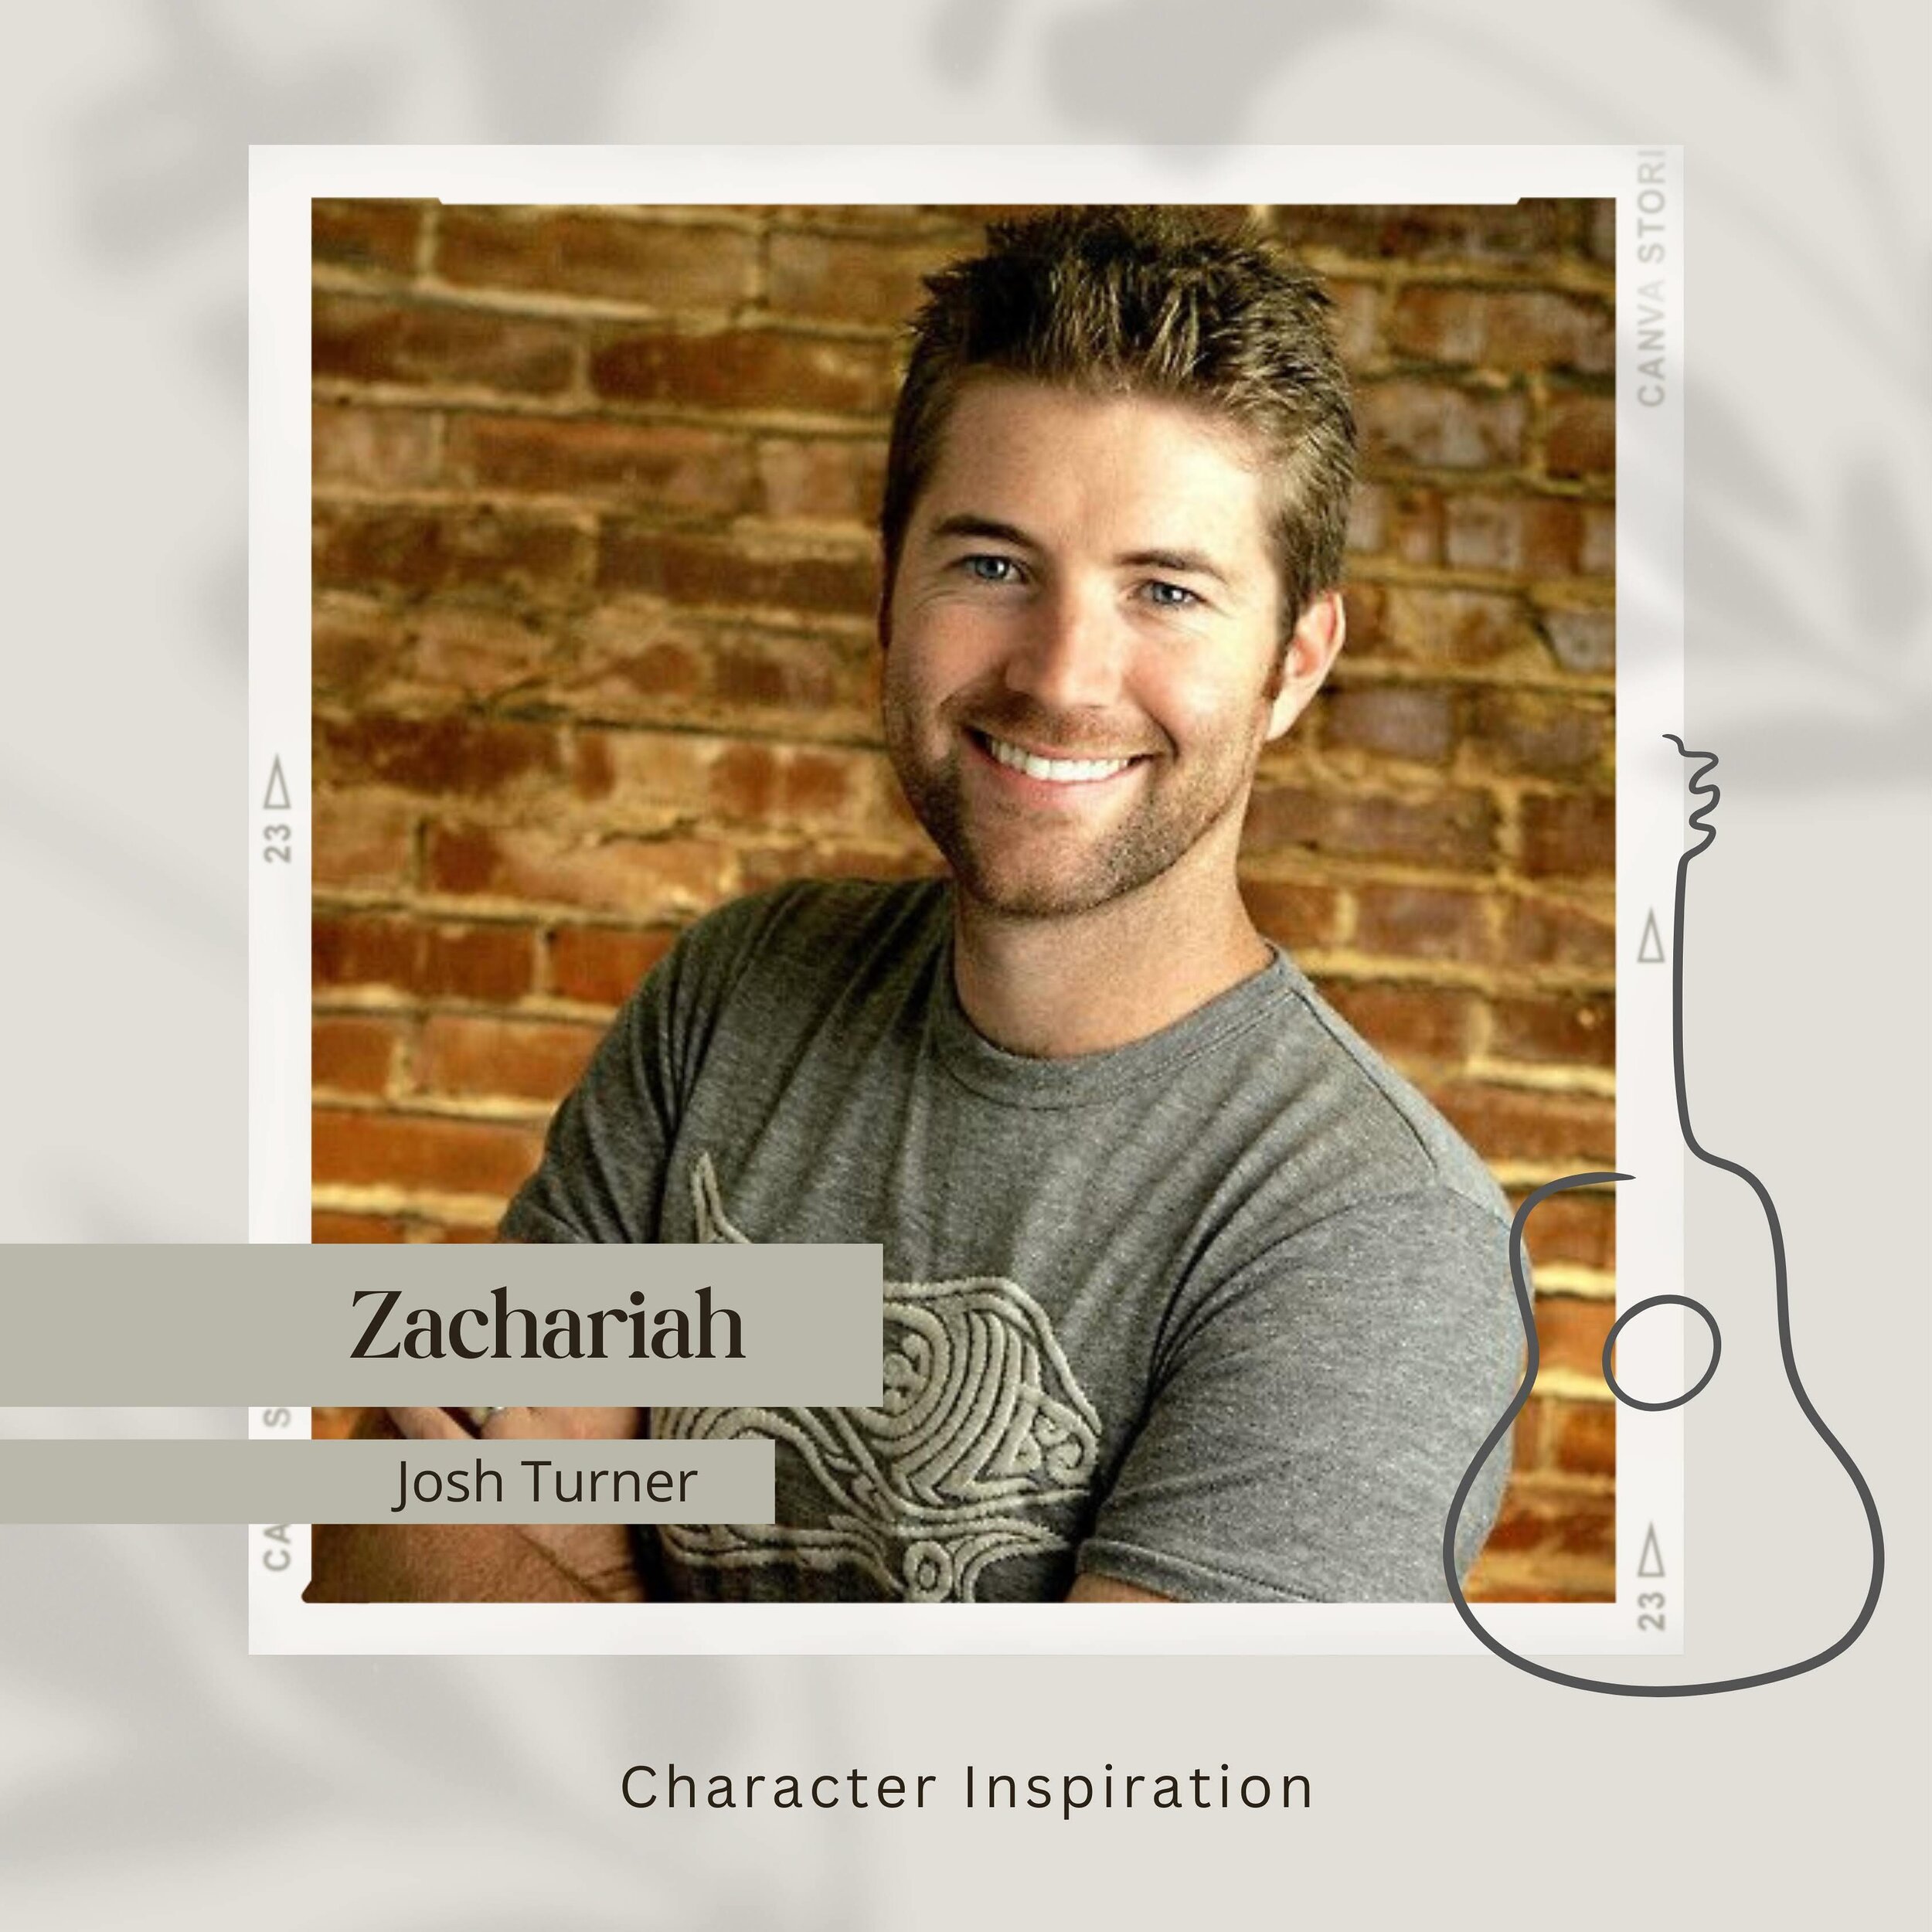 My inspiration for the character of Zachariah Mayne in Country Haven was a younger version of singer Josh Turner.